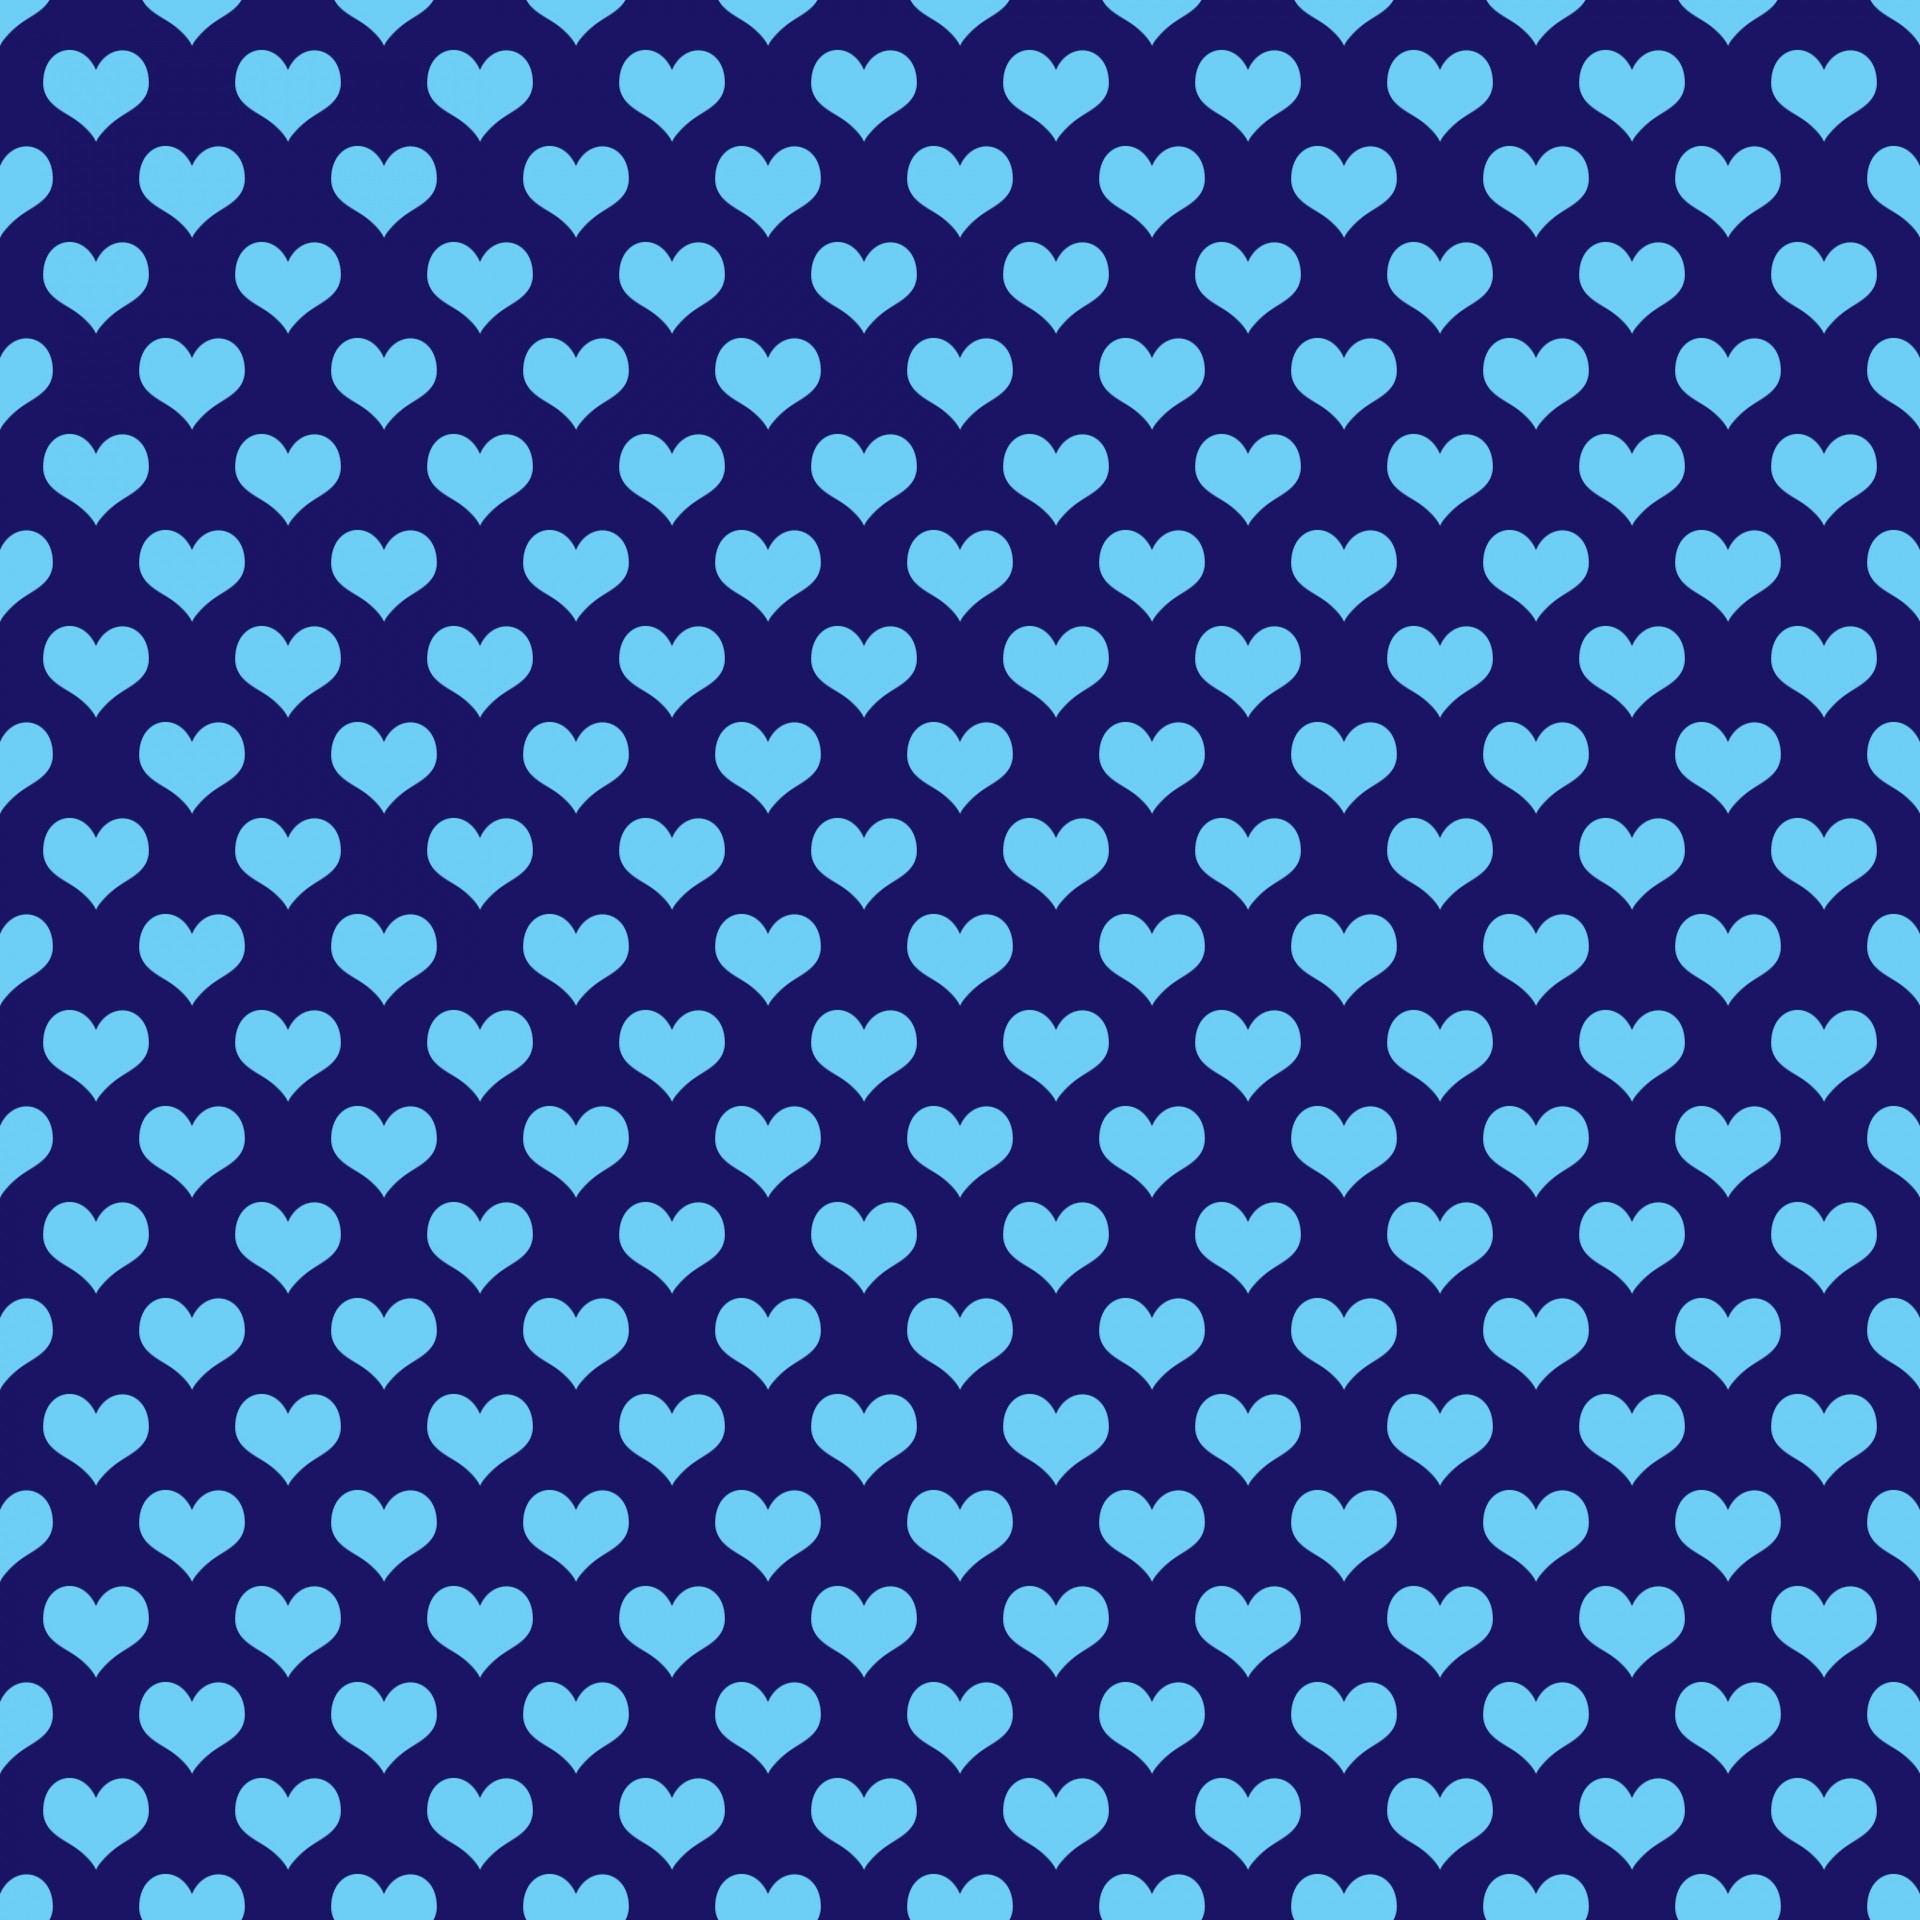 Hearts Background Wallpaper Blue Free Stock Photo – Public Domain Pictures